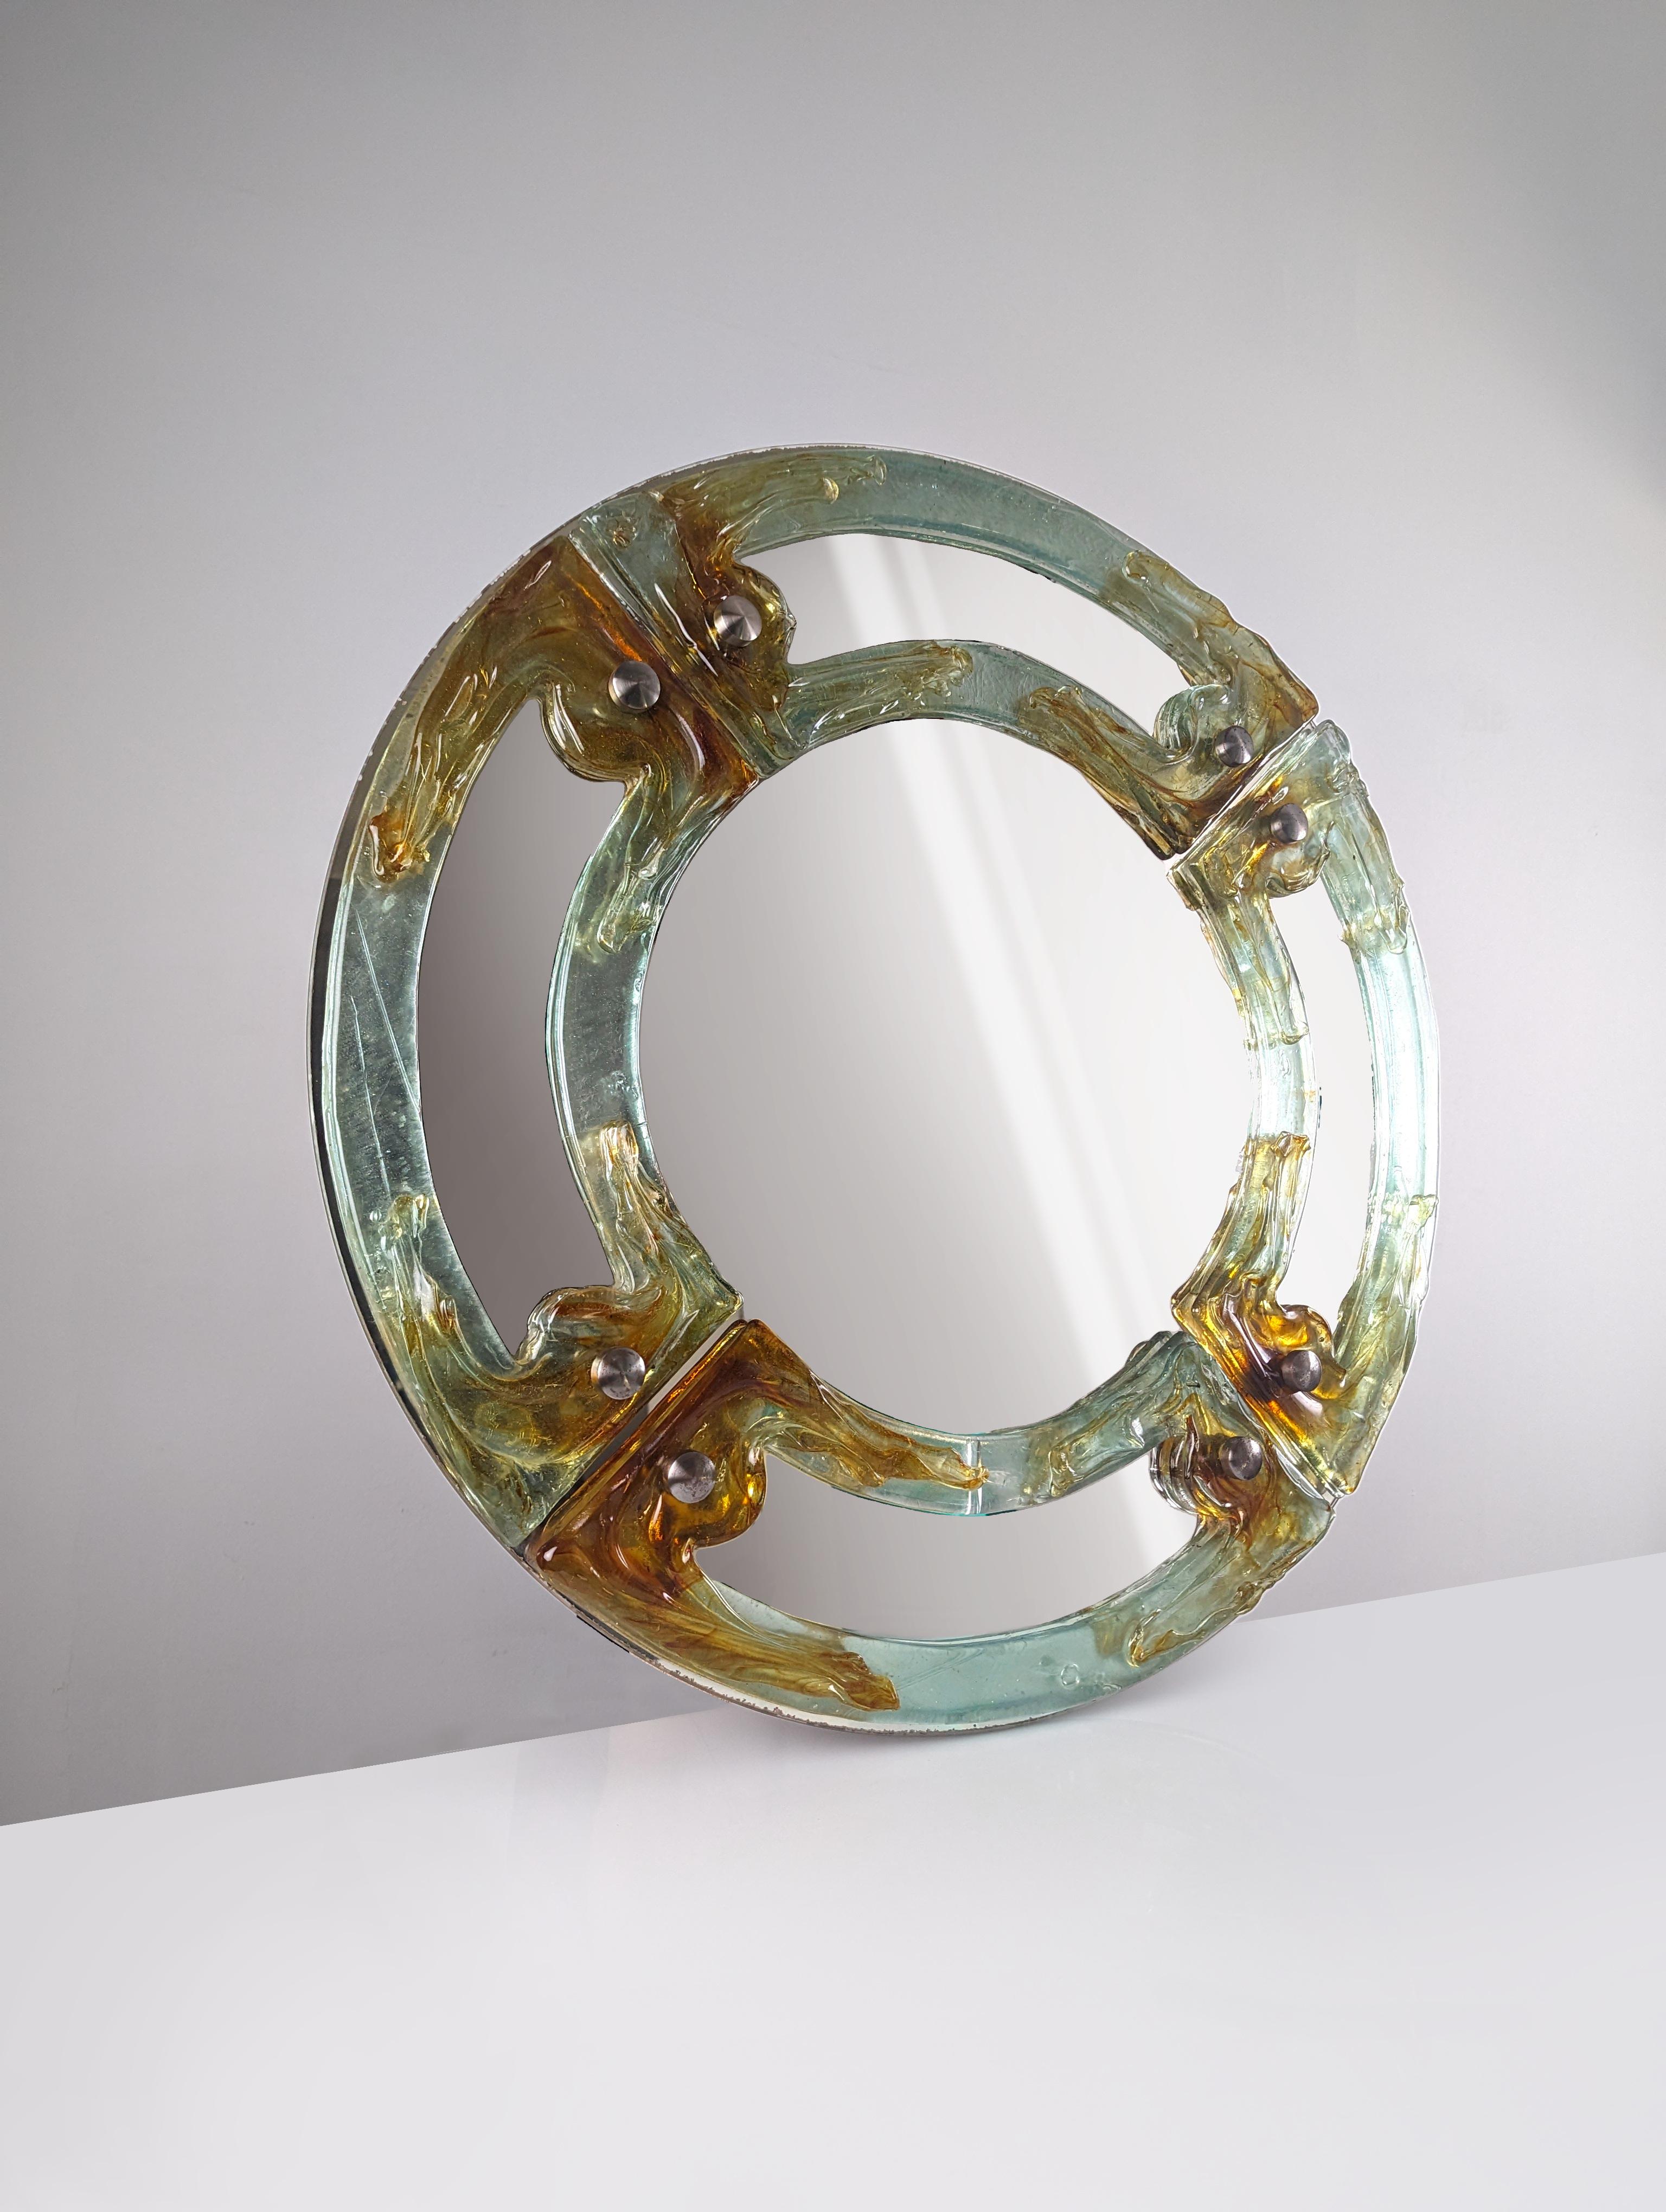 Mid-Century Modern Round Venetian Mirror in Amber Murano Glass by Mazzega 1960s For Sale